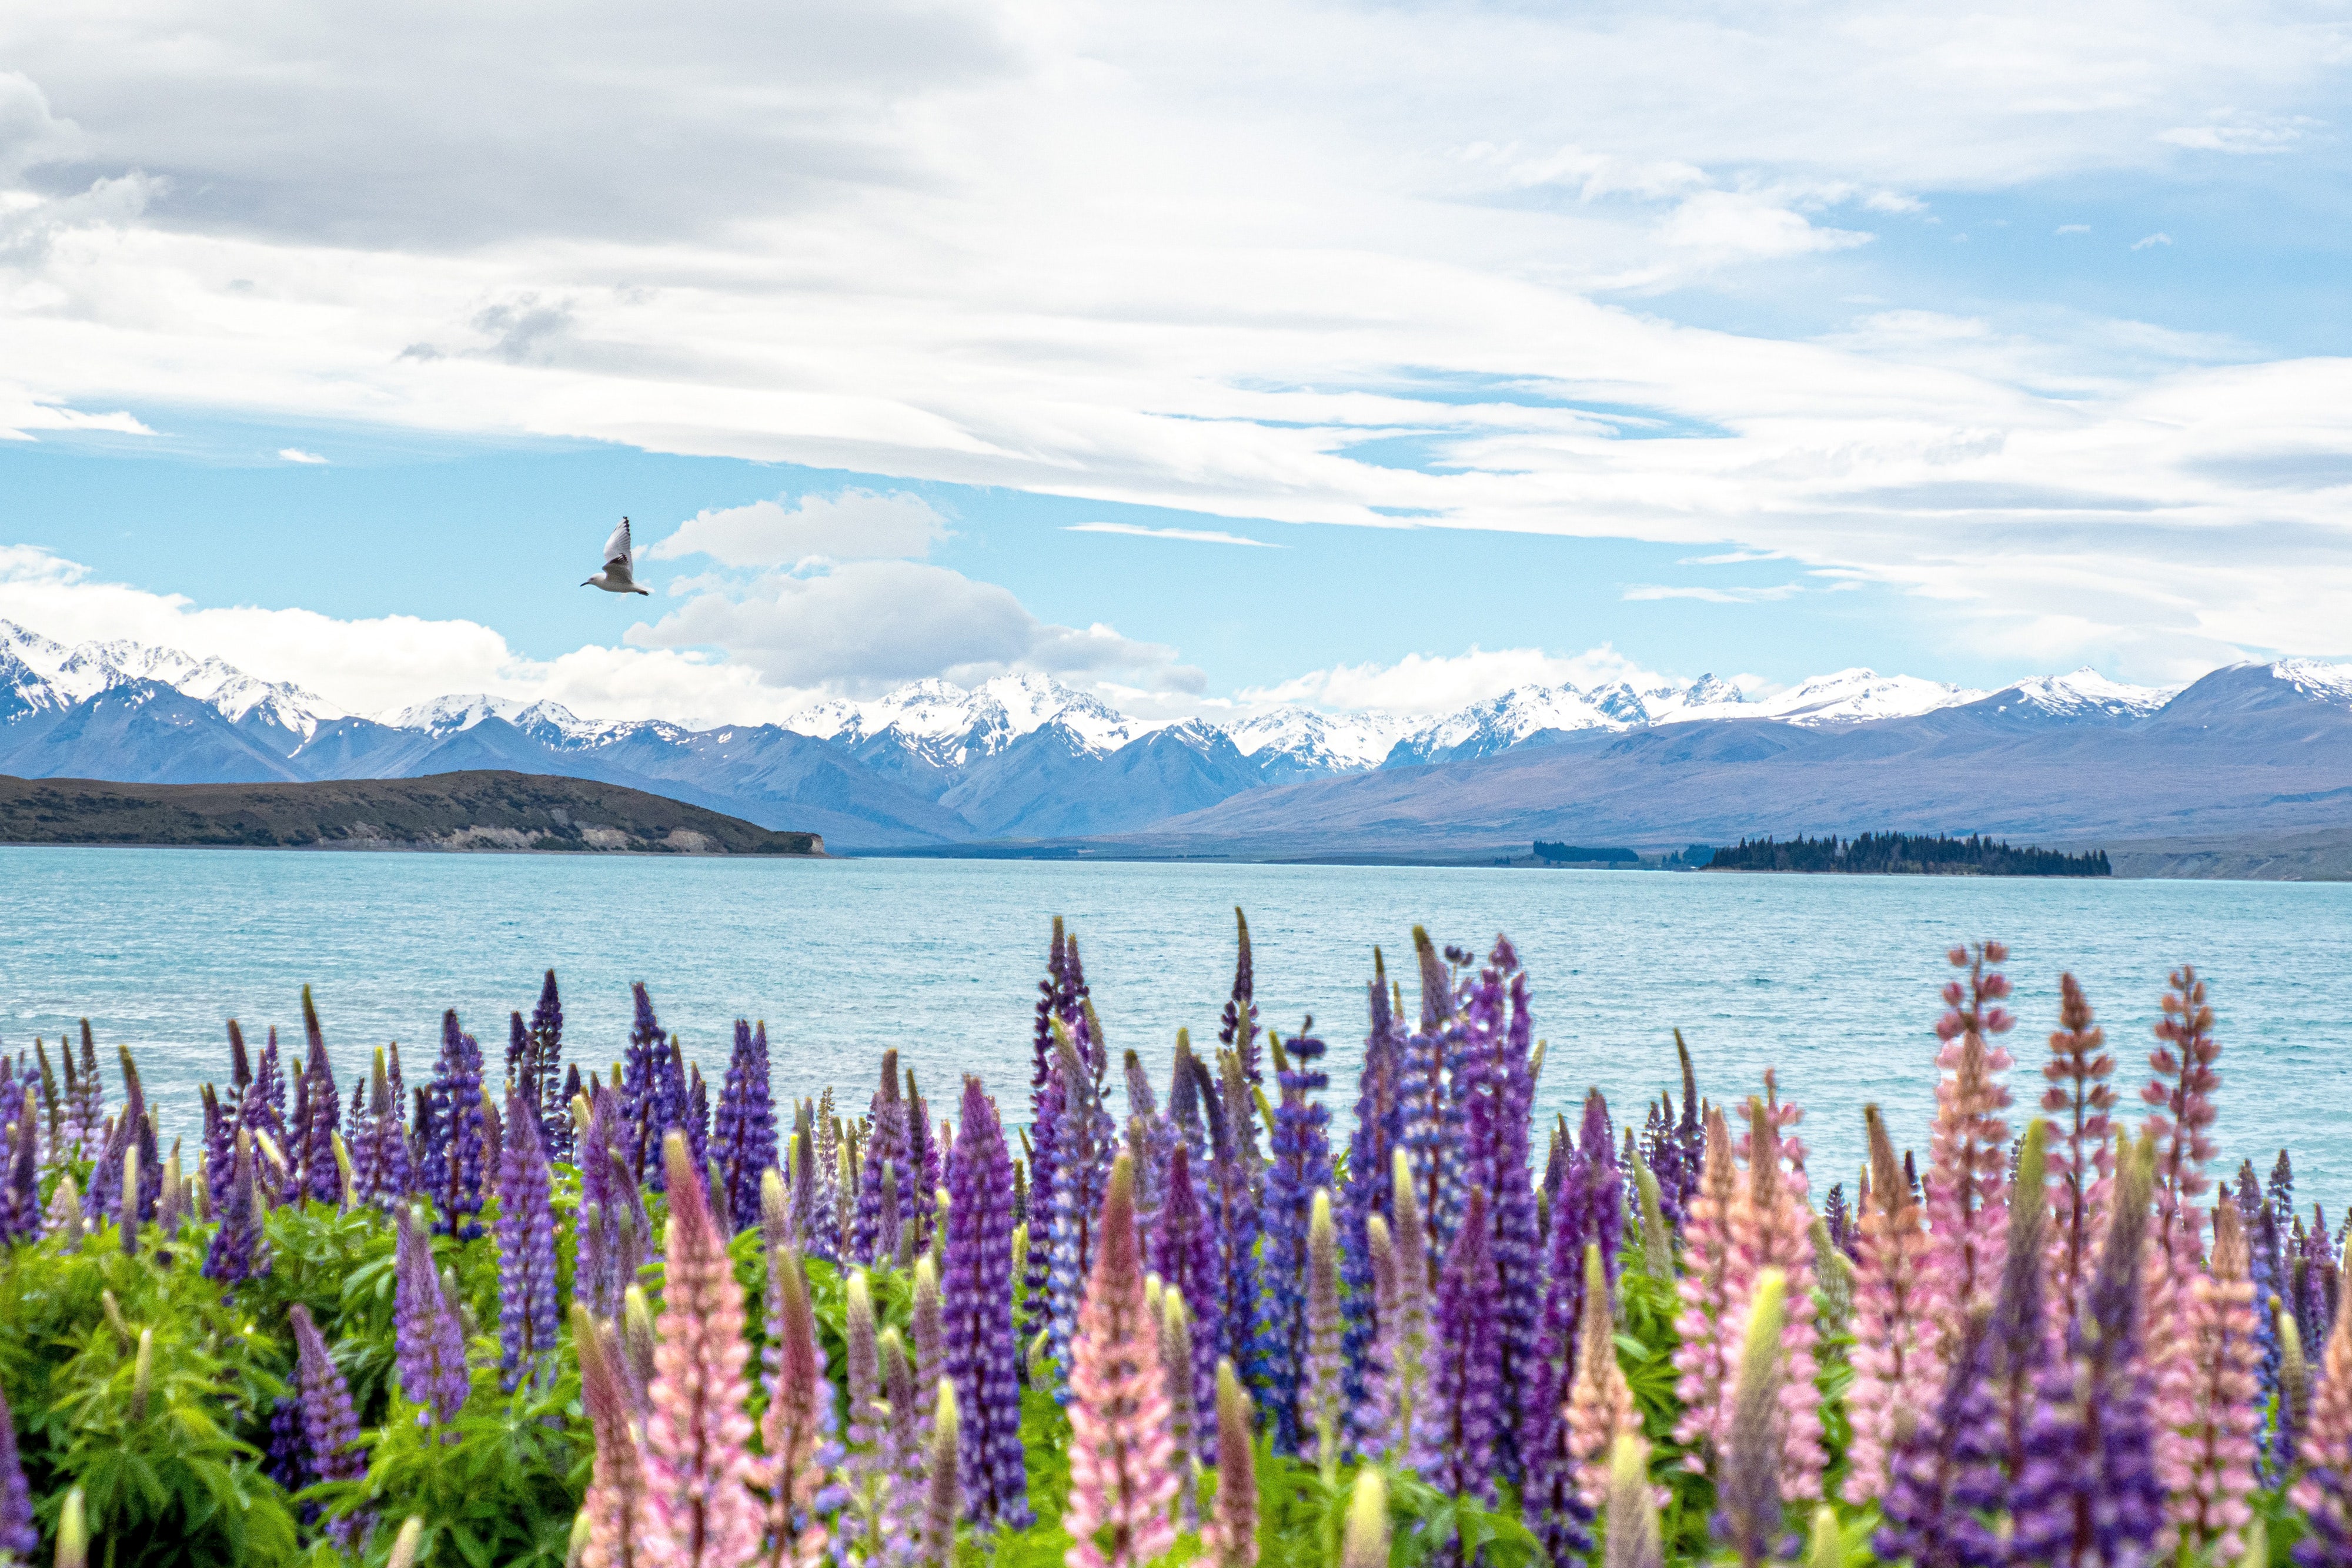 While plenty of lakes in New Zealand boast blue waters and mountainous backdrops, Lake Tekapo stands out for the purple, pink, and blue-hued lupins lining its shores. The colorful flowers (which reach <a href="https://www.cntraveler.com/gallery/where-to-see-blooming-flowers-around-the-world?mbid=synd_msn_rss&utm_source=msn&utm_medium=syndication">peak bloom</a> in mid-November through December) help create one of the most striking vistas in the entire country. The lake also lies within the Aoraki Mackenzie International Dark Sky Reserve, making it one of the best places to stargaze in the entire southern hemisphere. It’s well worth booking overnight accommodations (there are plenty of villas and lodges available in the area) just to experience the spectacular night sky.